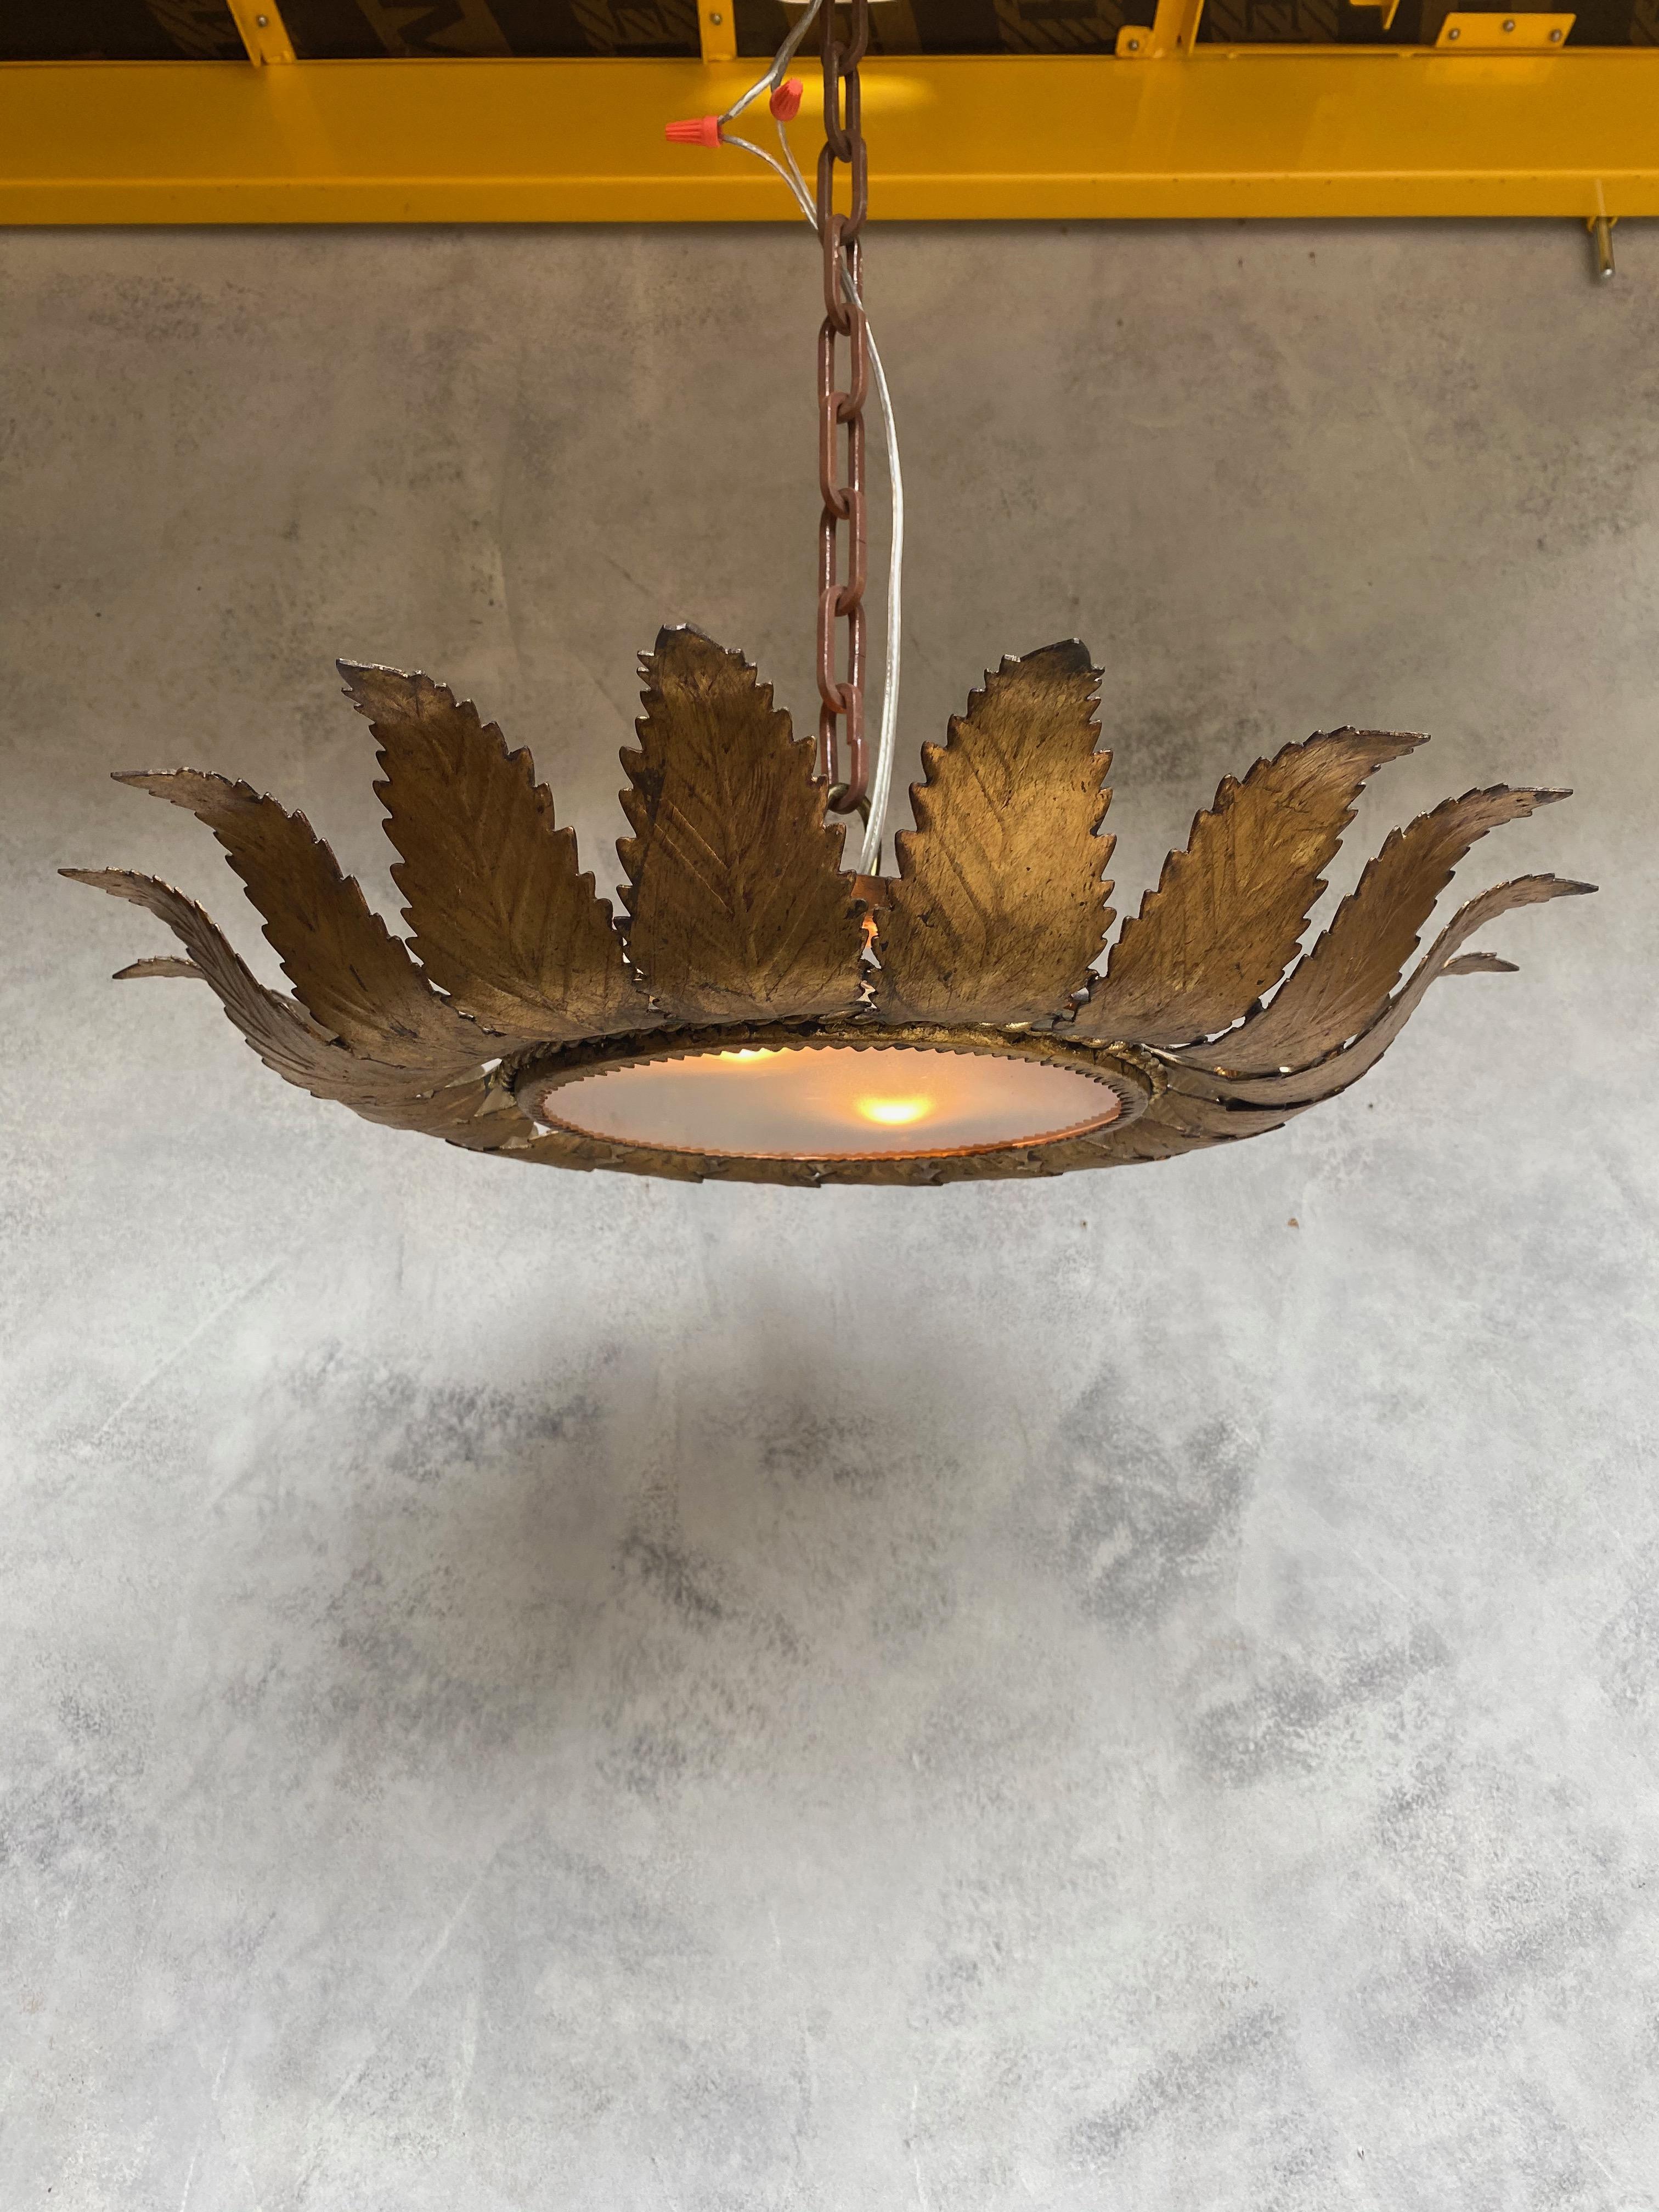 This stunning gilt metal sunburst ceiling fixture from 1950s Spain features eighteen stylized feathered rays that radiate from its core. Each ray is masterfully joined at the base by a single braid, further accentuated by an eye-catching tetrafoil